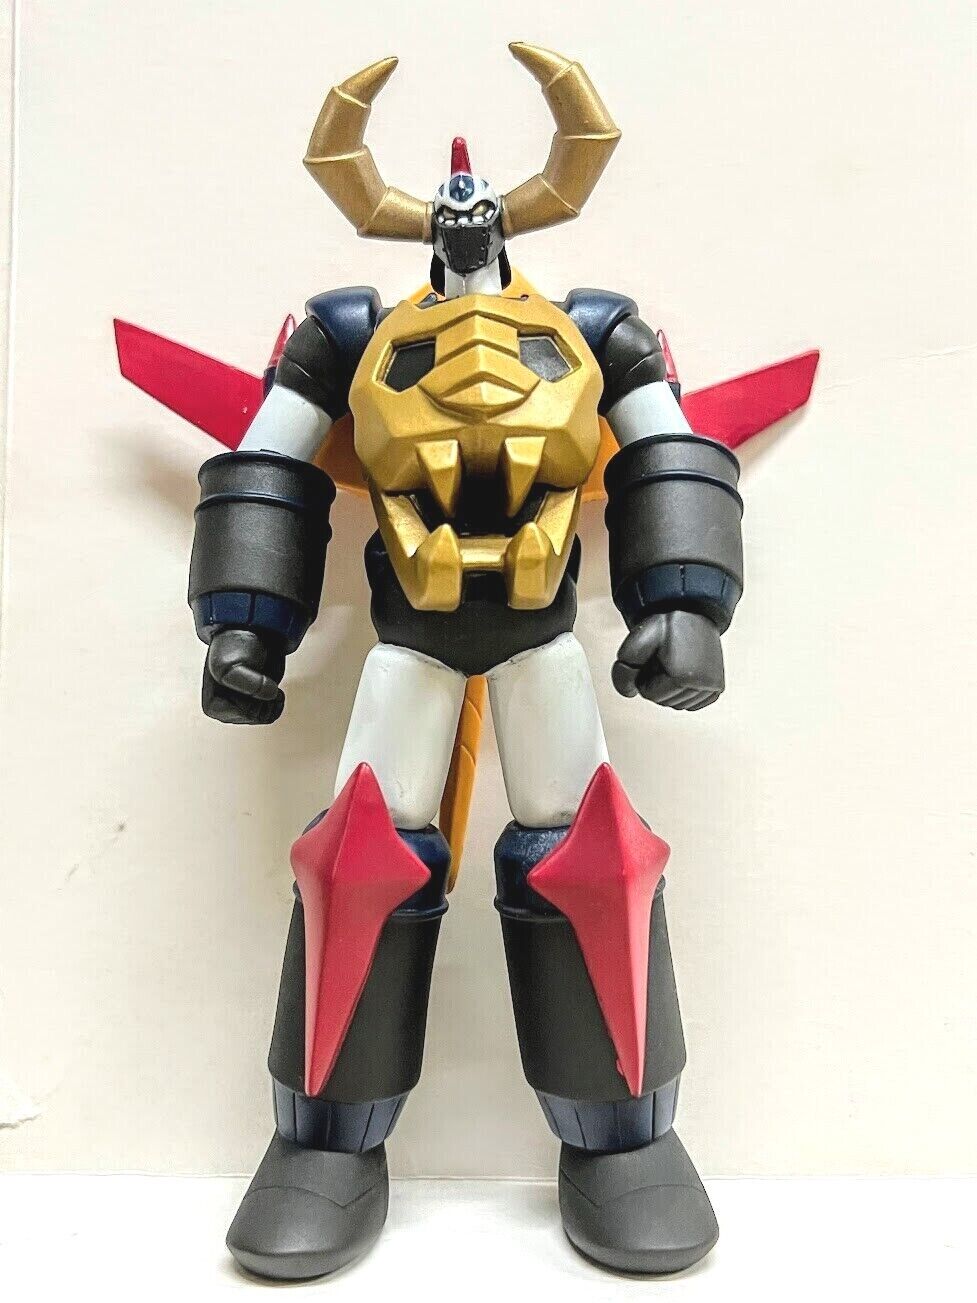 Most Wanted Super Robot Sky Gaiking 6 inches vinyl action figure 2007 大空魔竜ガイキング